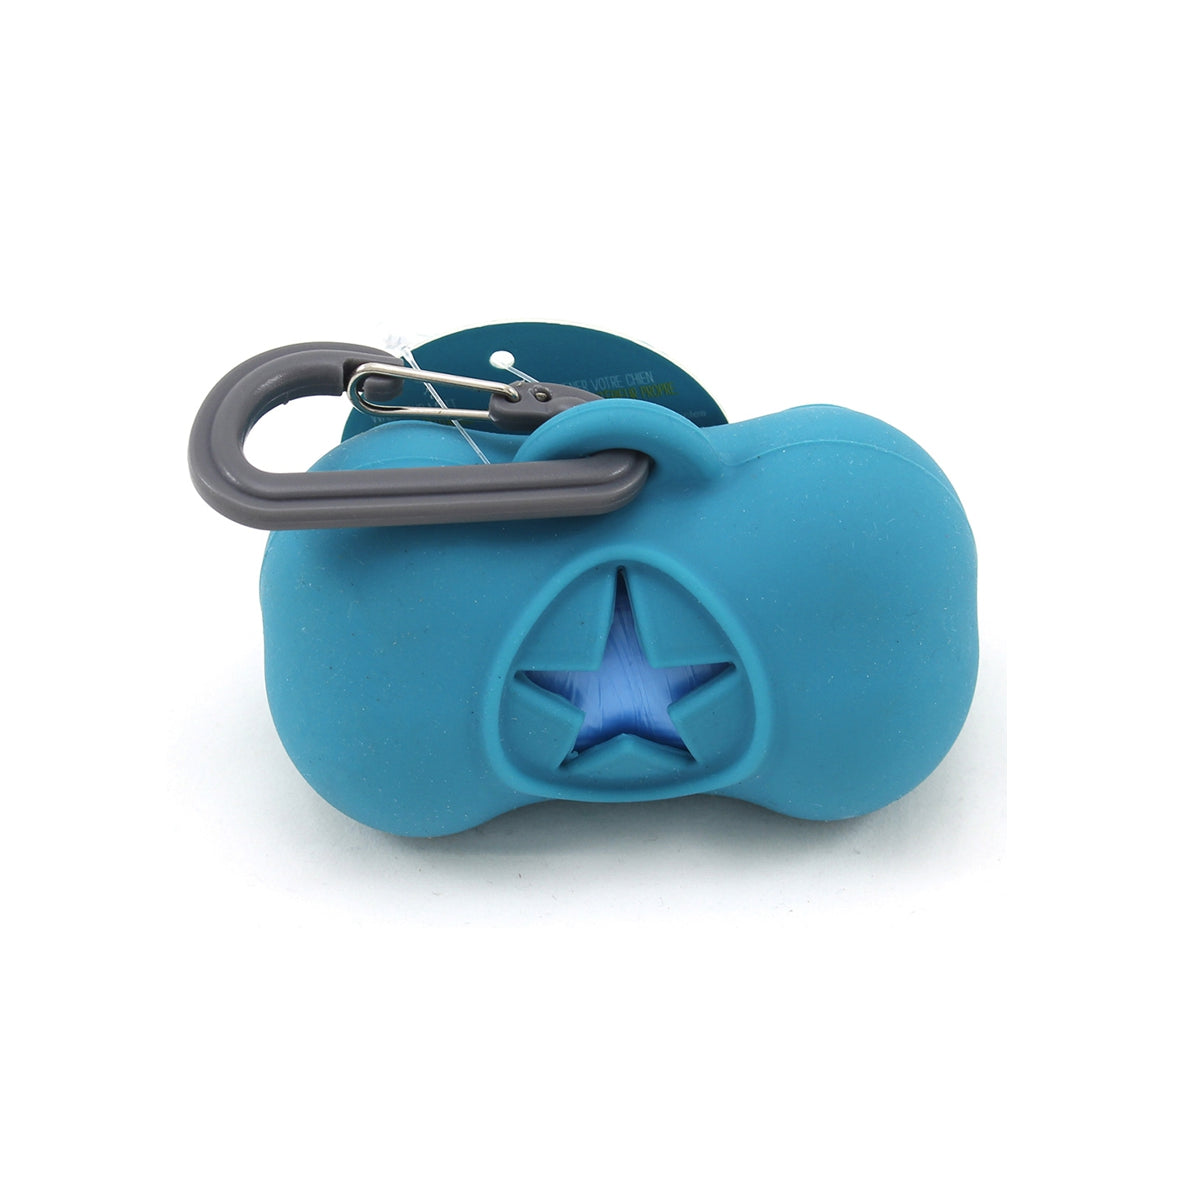 Messy Mutts Waste Bag Dispenser in Blue | Pawlicious & Company